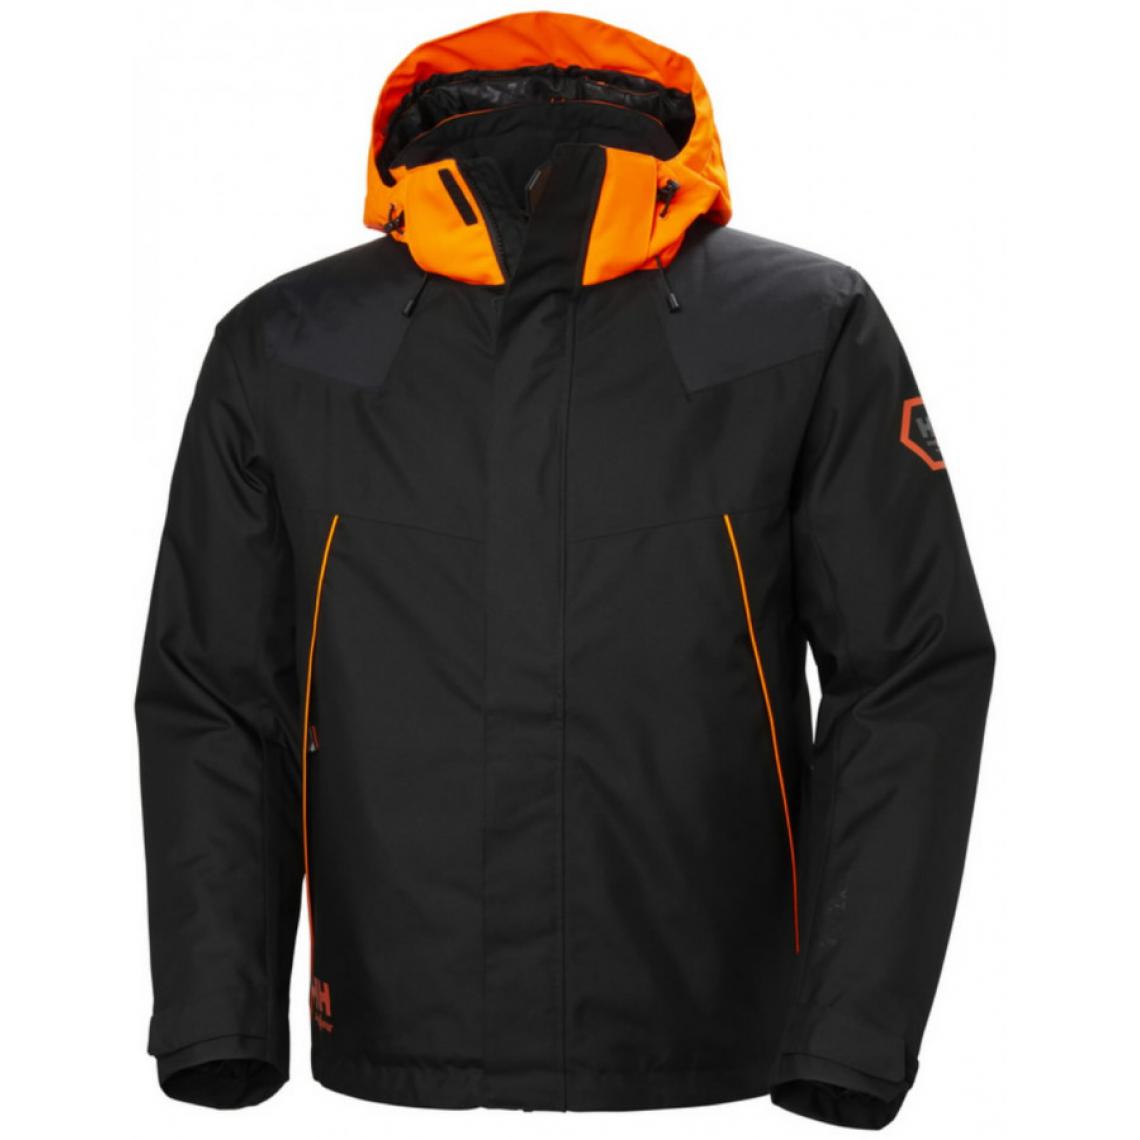 Helly Hansen - Veste hiver Chelsea Evolution HELLY HANSEN - T.M - 71340_950_M - Protections corps